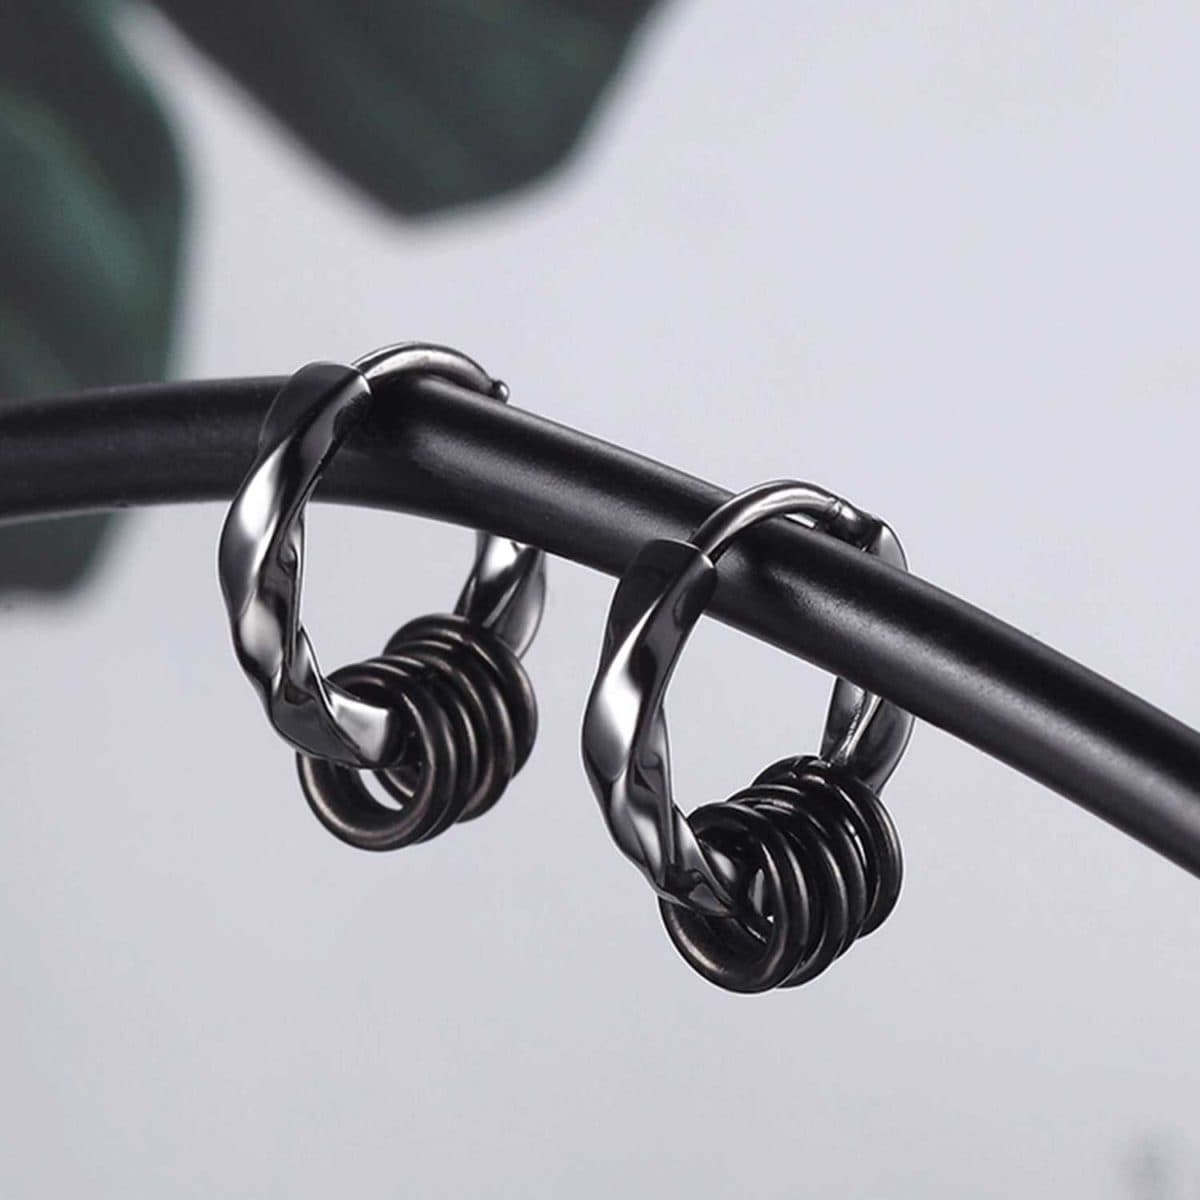 https://m.clubbella.co/product/curtis-2-way-hoop-earrings-black/ tb_image_share_1655496354143.jpg